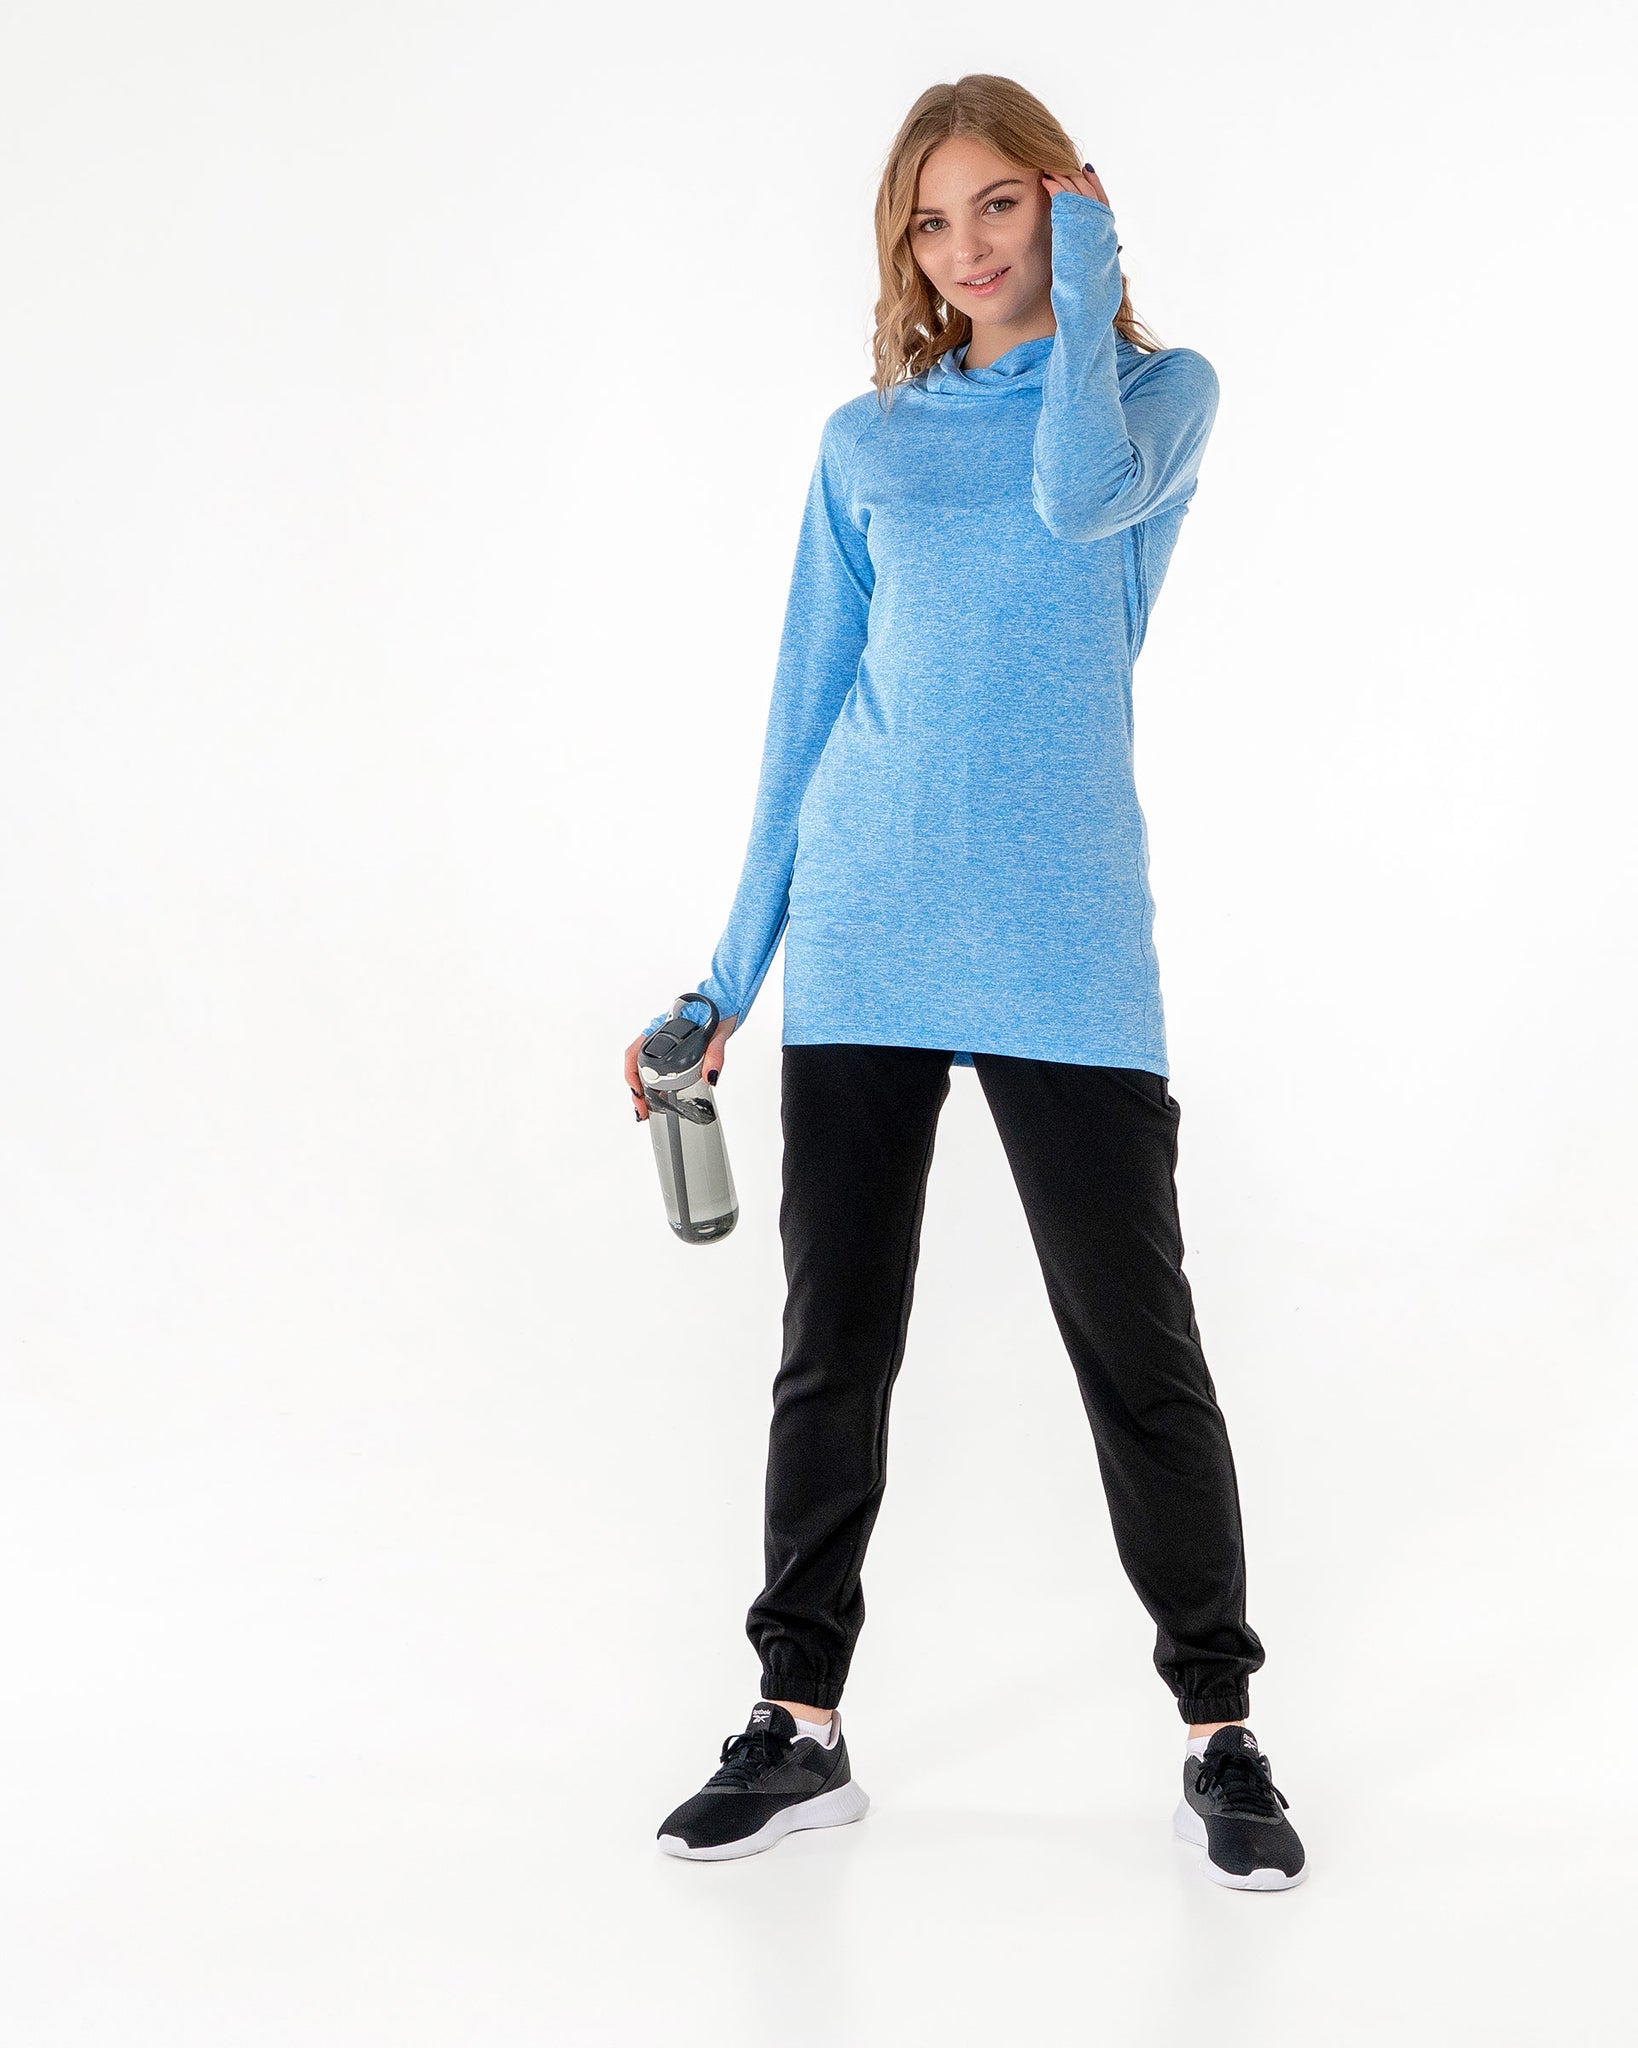 Halo Running Hoodie in heathered blue by Veil Garments. Modest activewear collection.